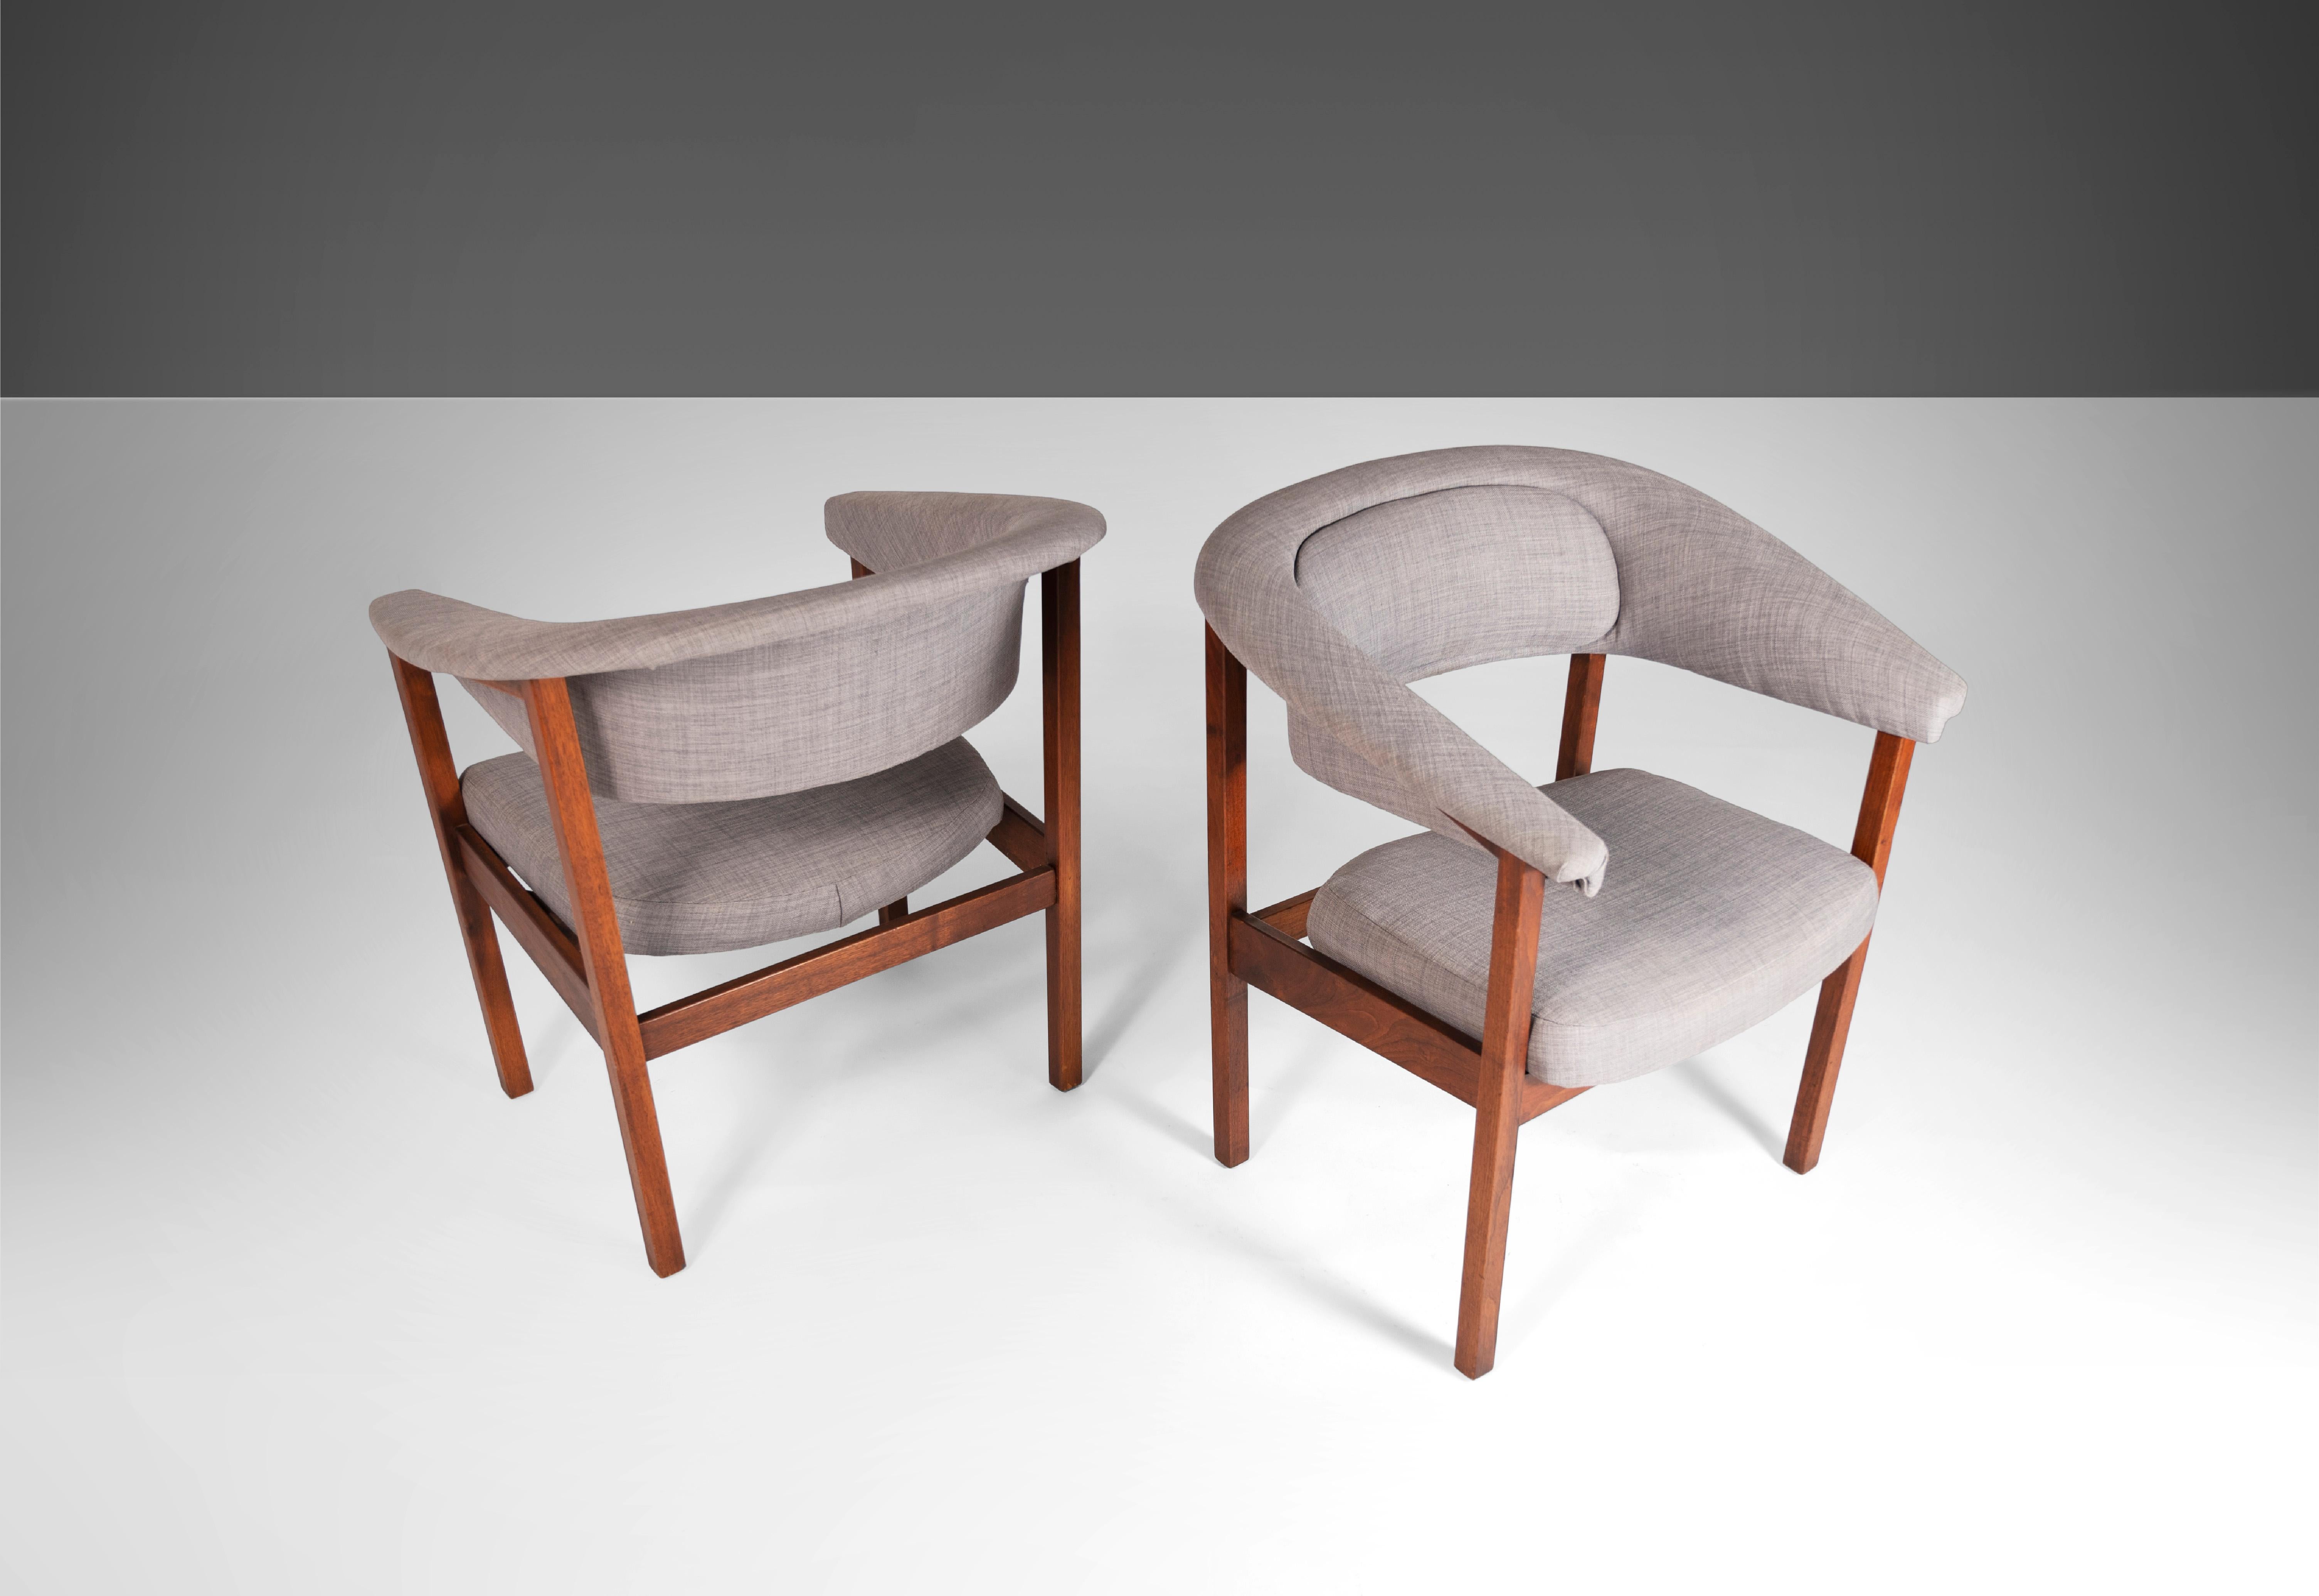 Pair of Chairs by Arthur Umanoff for Madison in Original Knit Fabric, c. 1960s For Sale 3